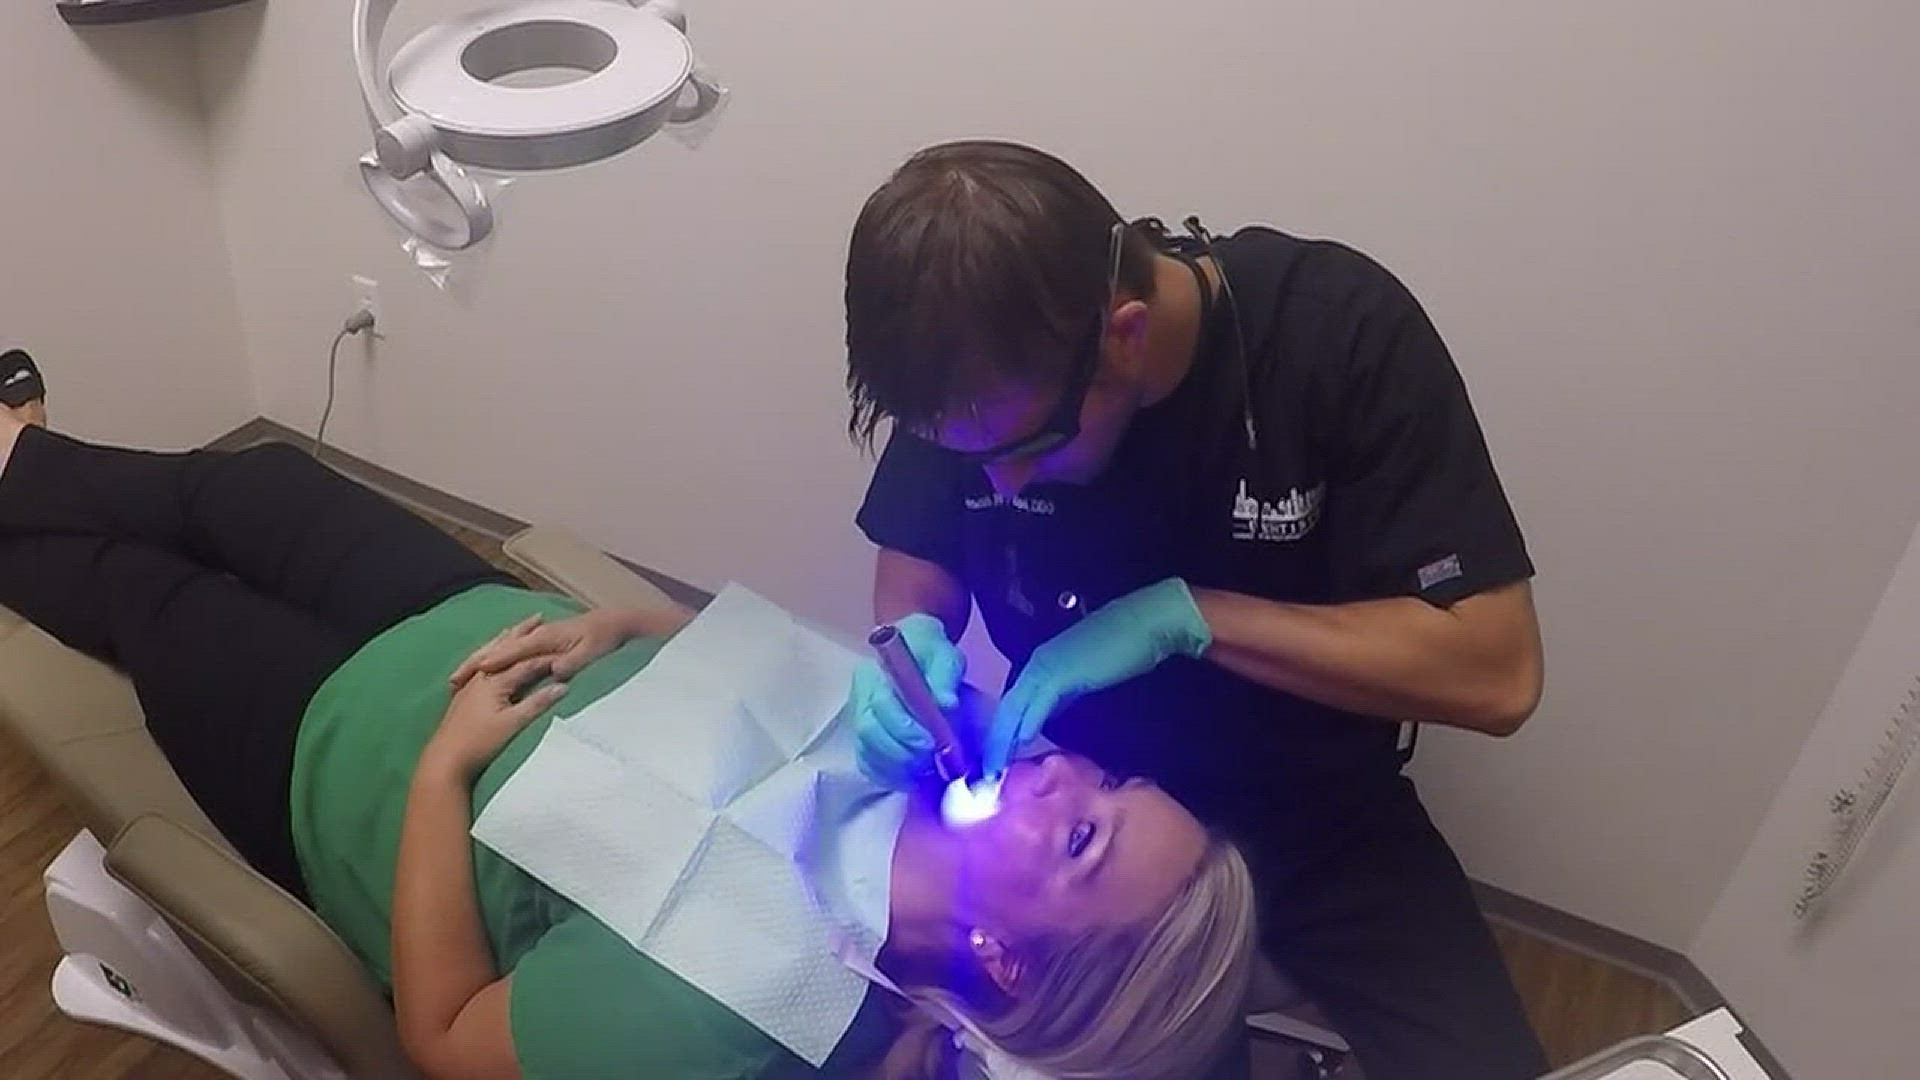 More than 30,000 people are diagnosed with oral cancer each year and those numbers are growing. Now dentists have a new tool to help catch it early.